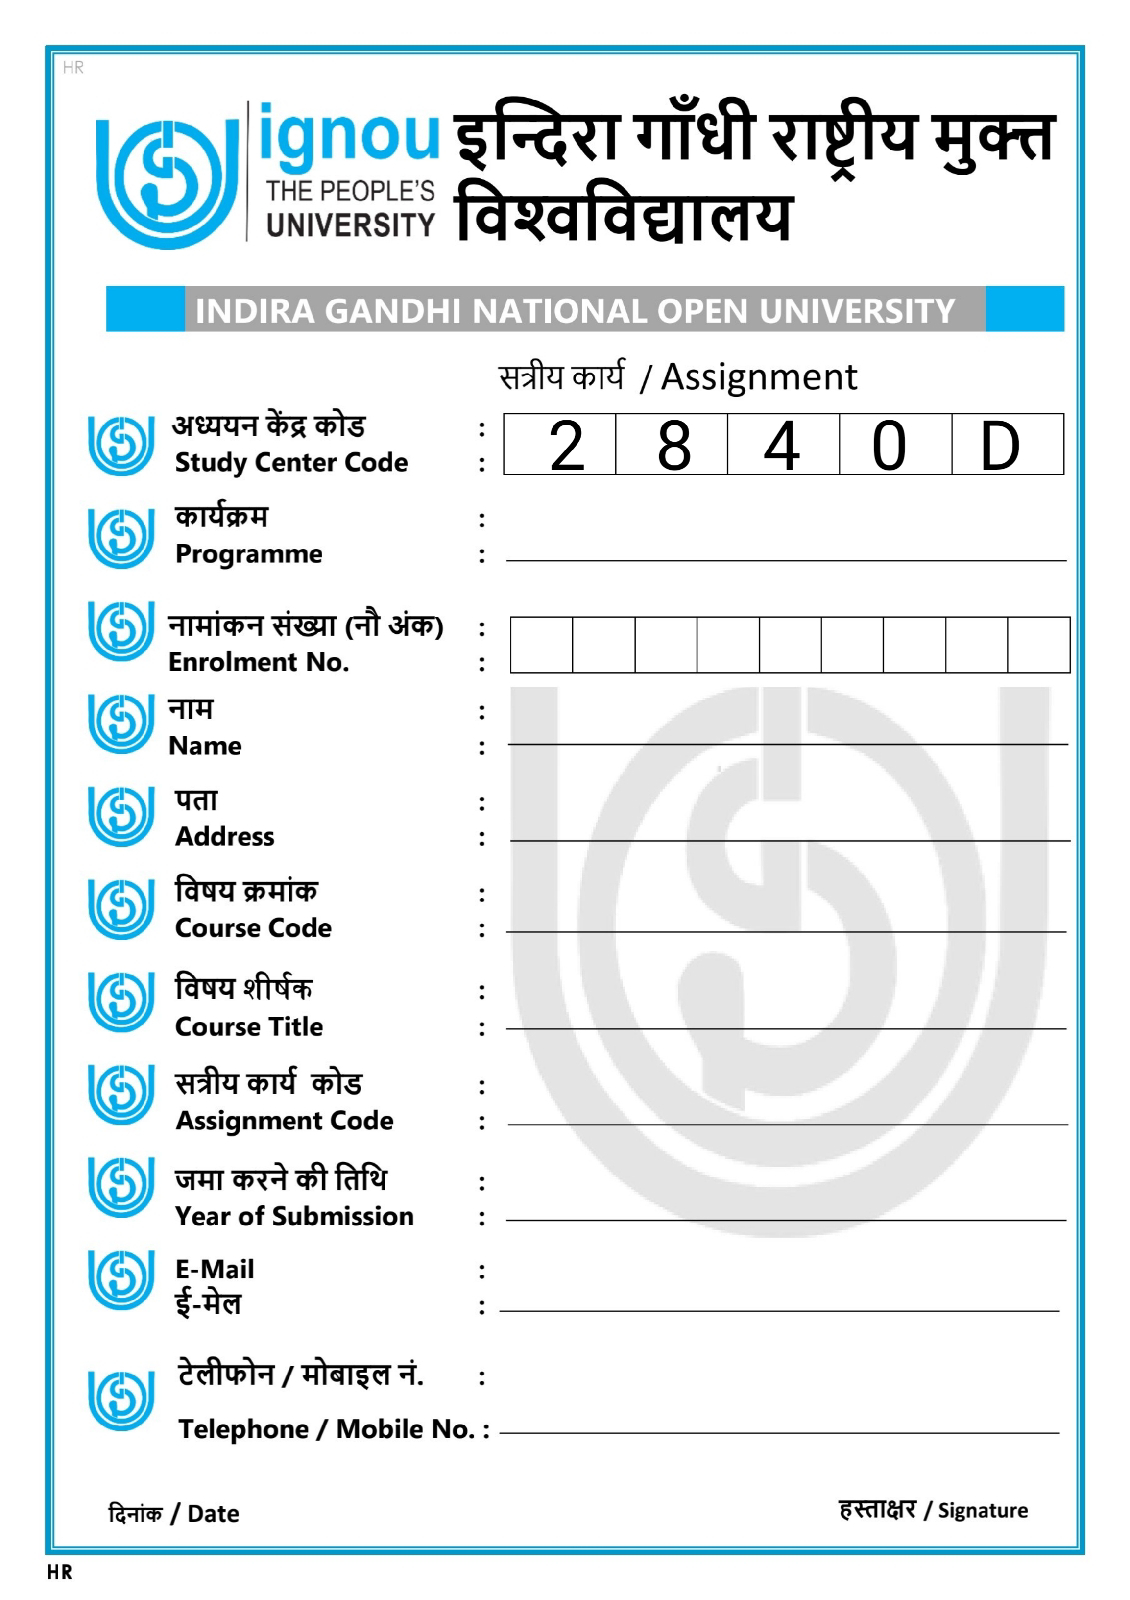 assignment marks in ignou